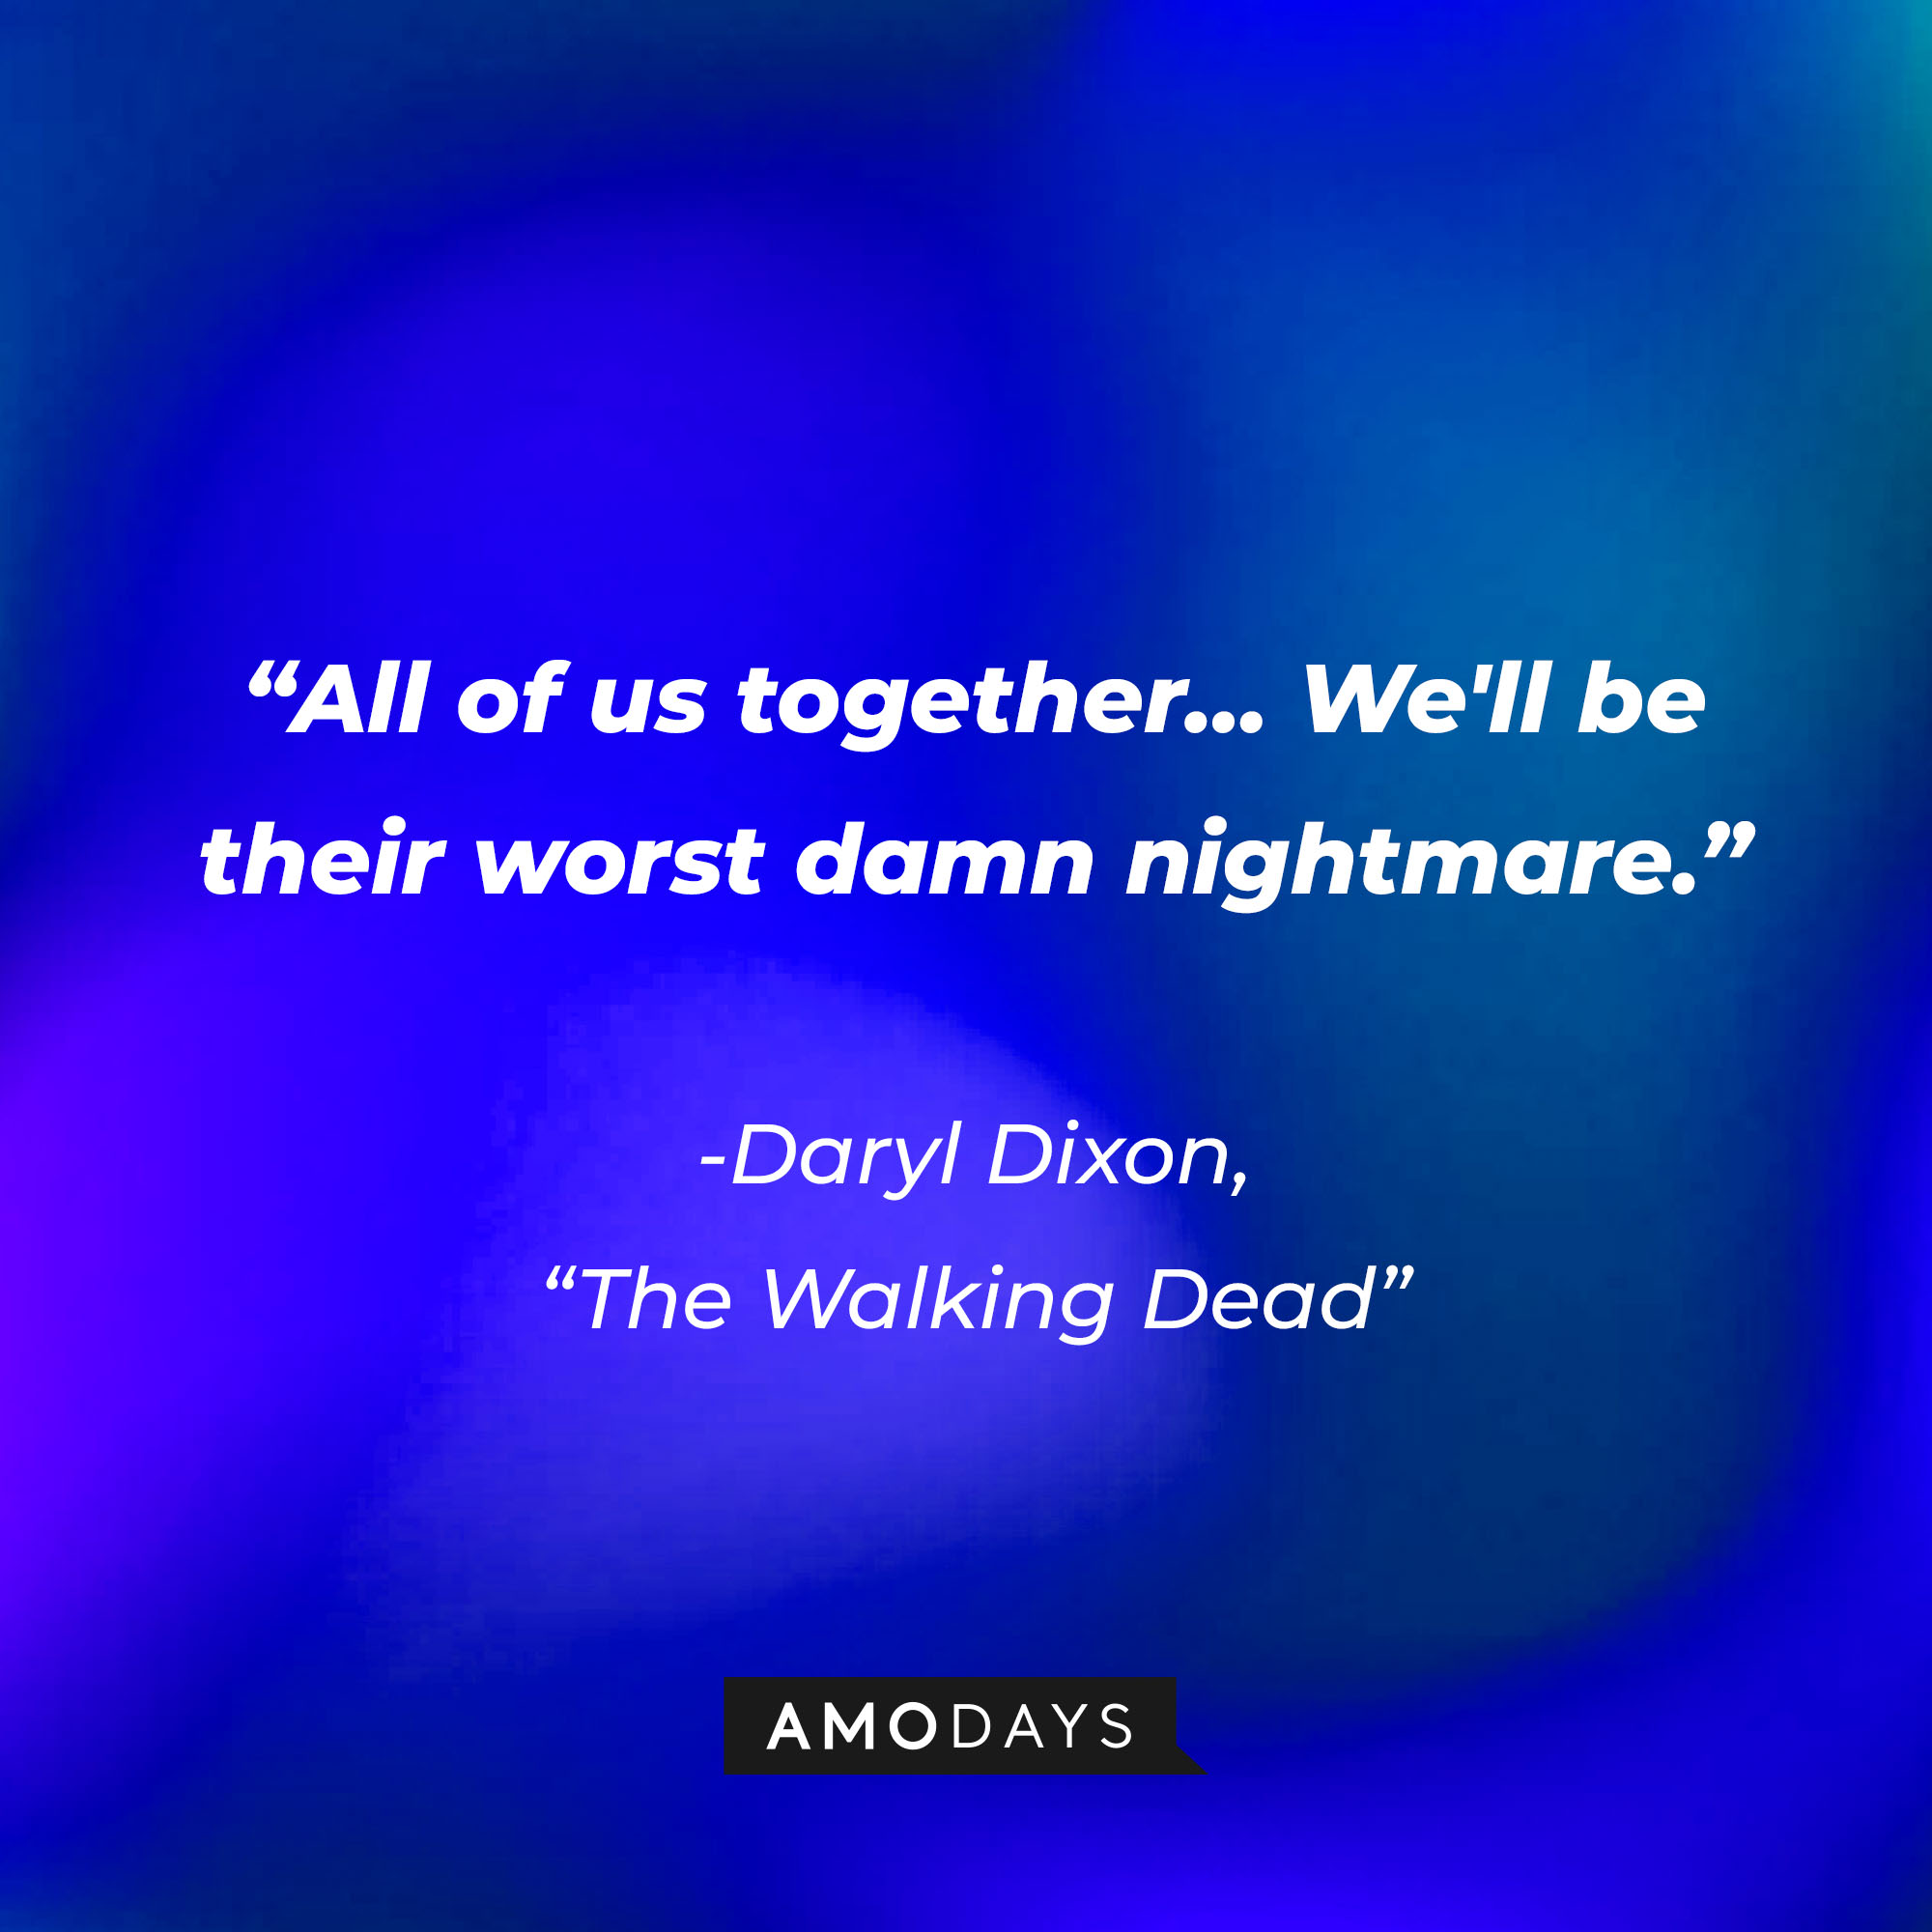 Daryl Dixon’s quote from “The Walking Dead”: “All of us together… We'll be their worst damn nightmare.” | Source: AmoDays